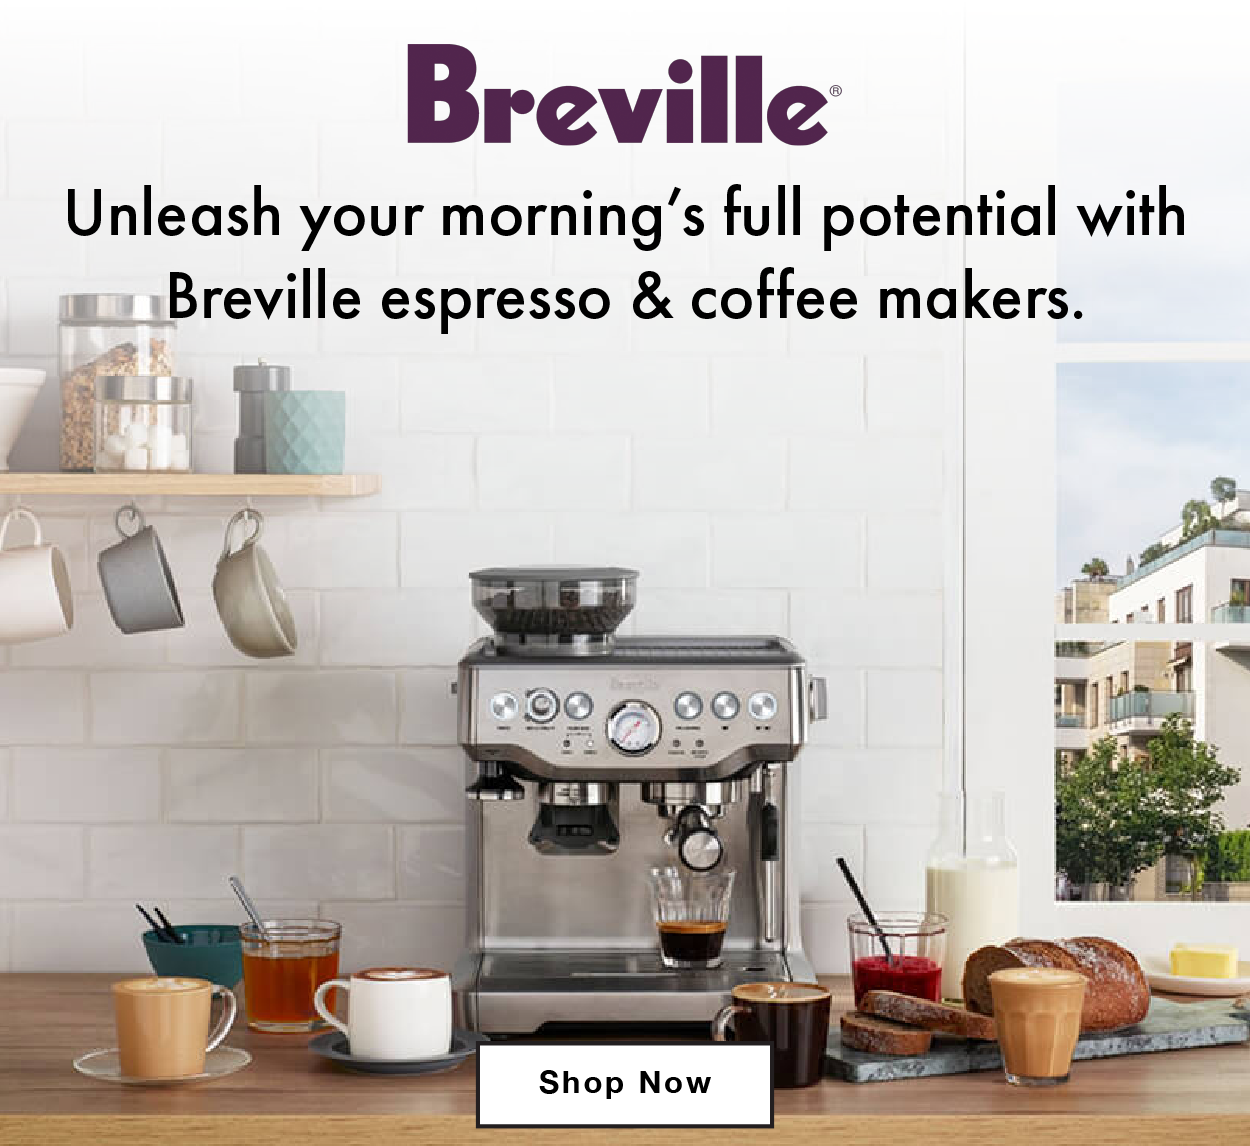 Breville- Unleash your morning's full potential with Breville espresso and coffee makers.